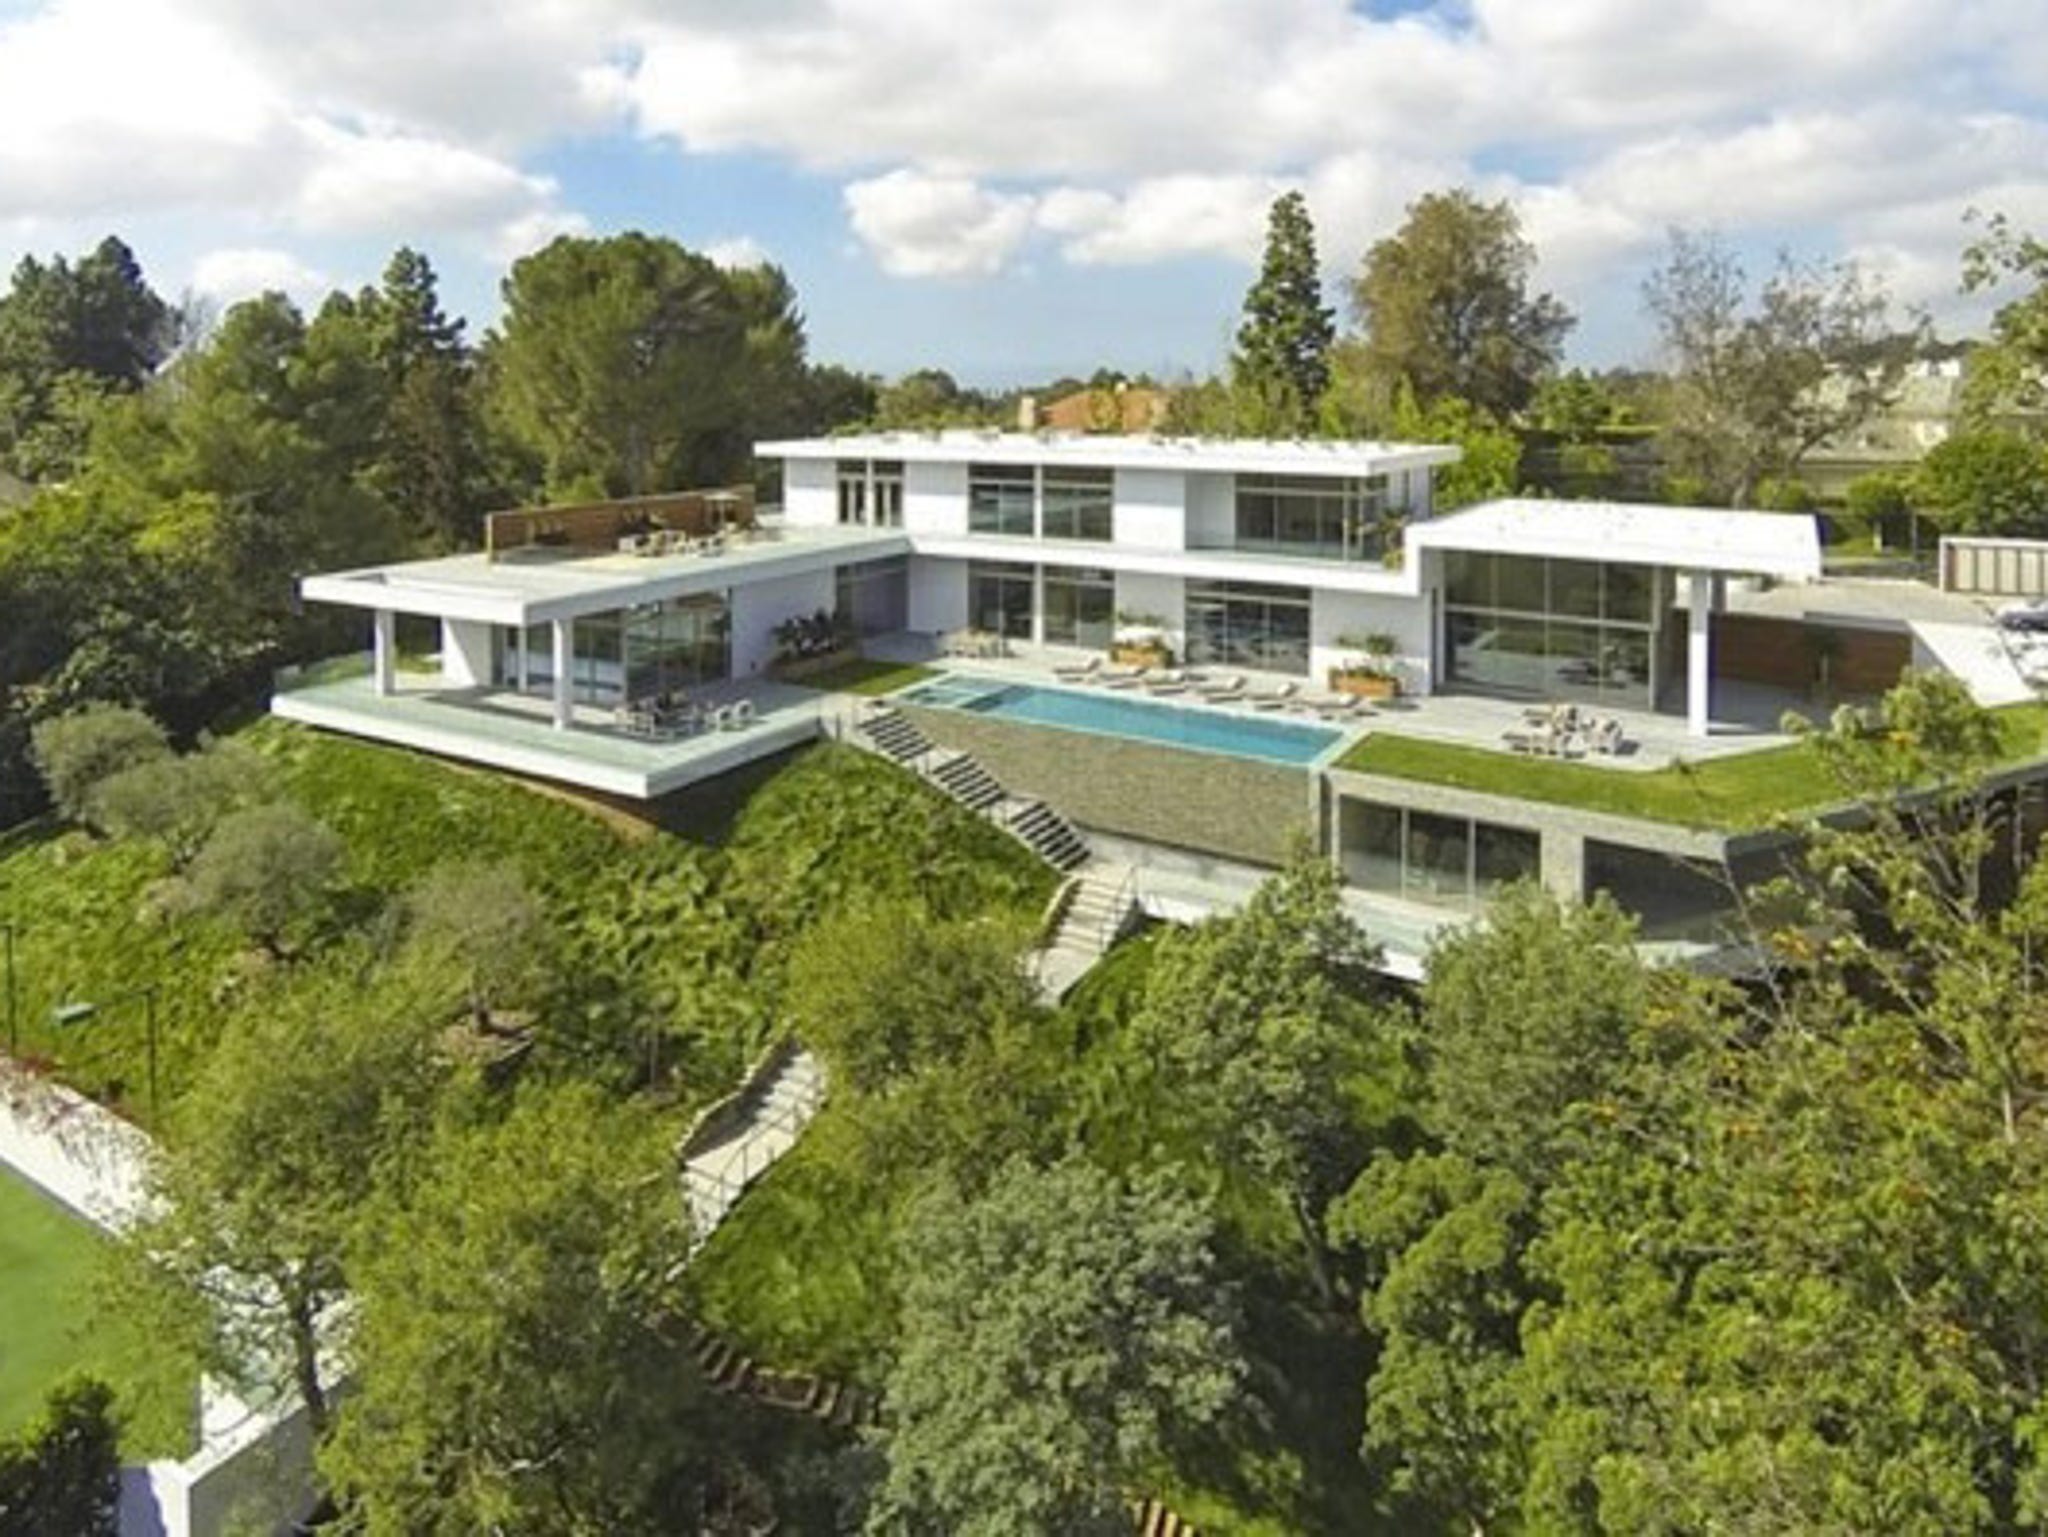 Beyoncé and Jay-Z buy over-the-top Bel Air mansion